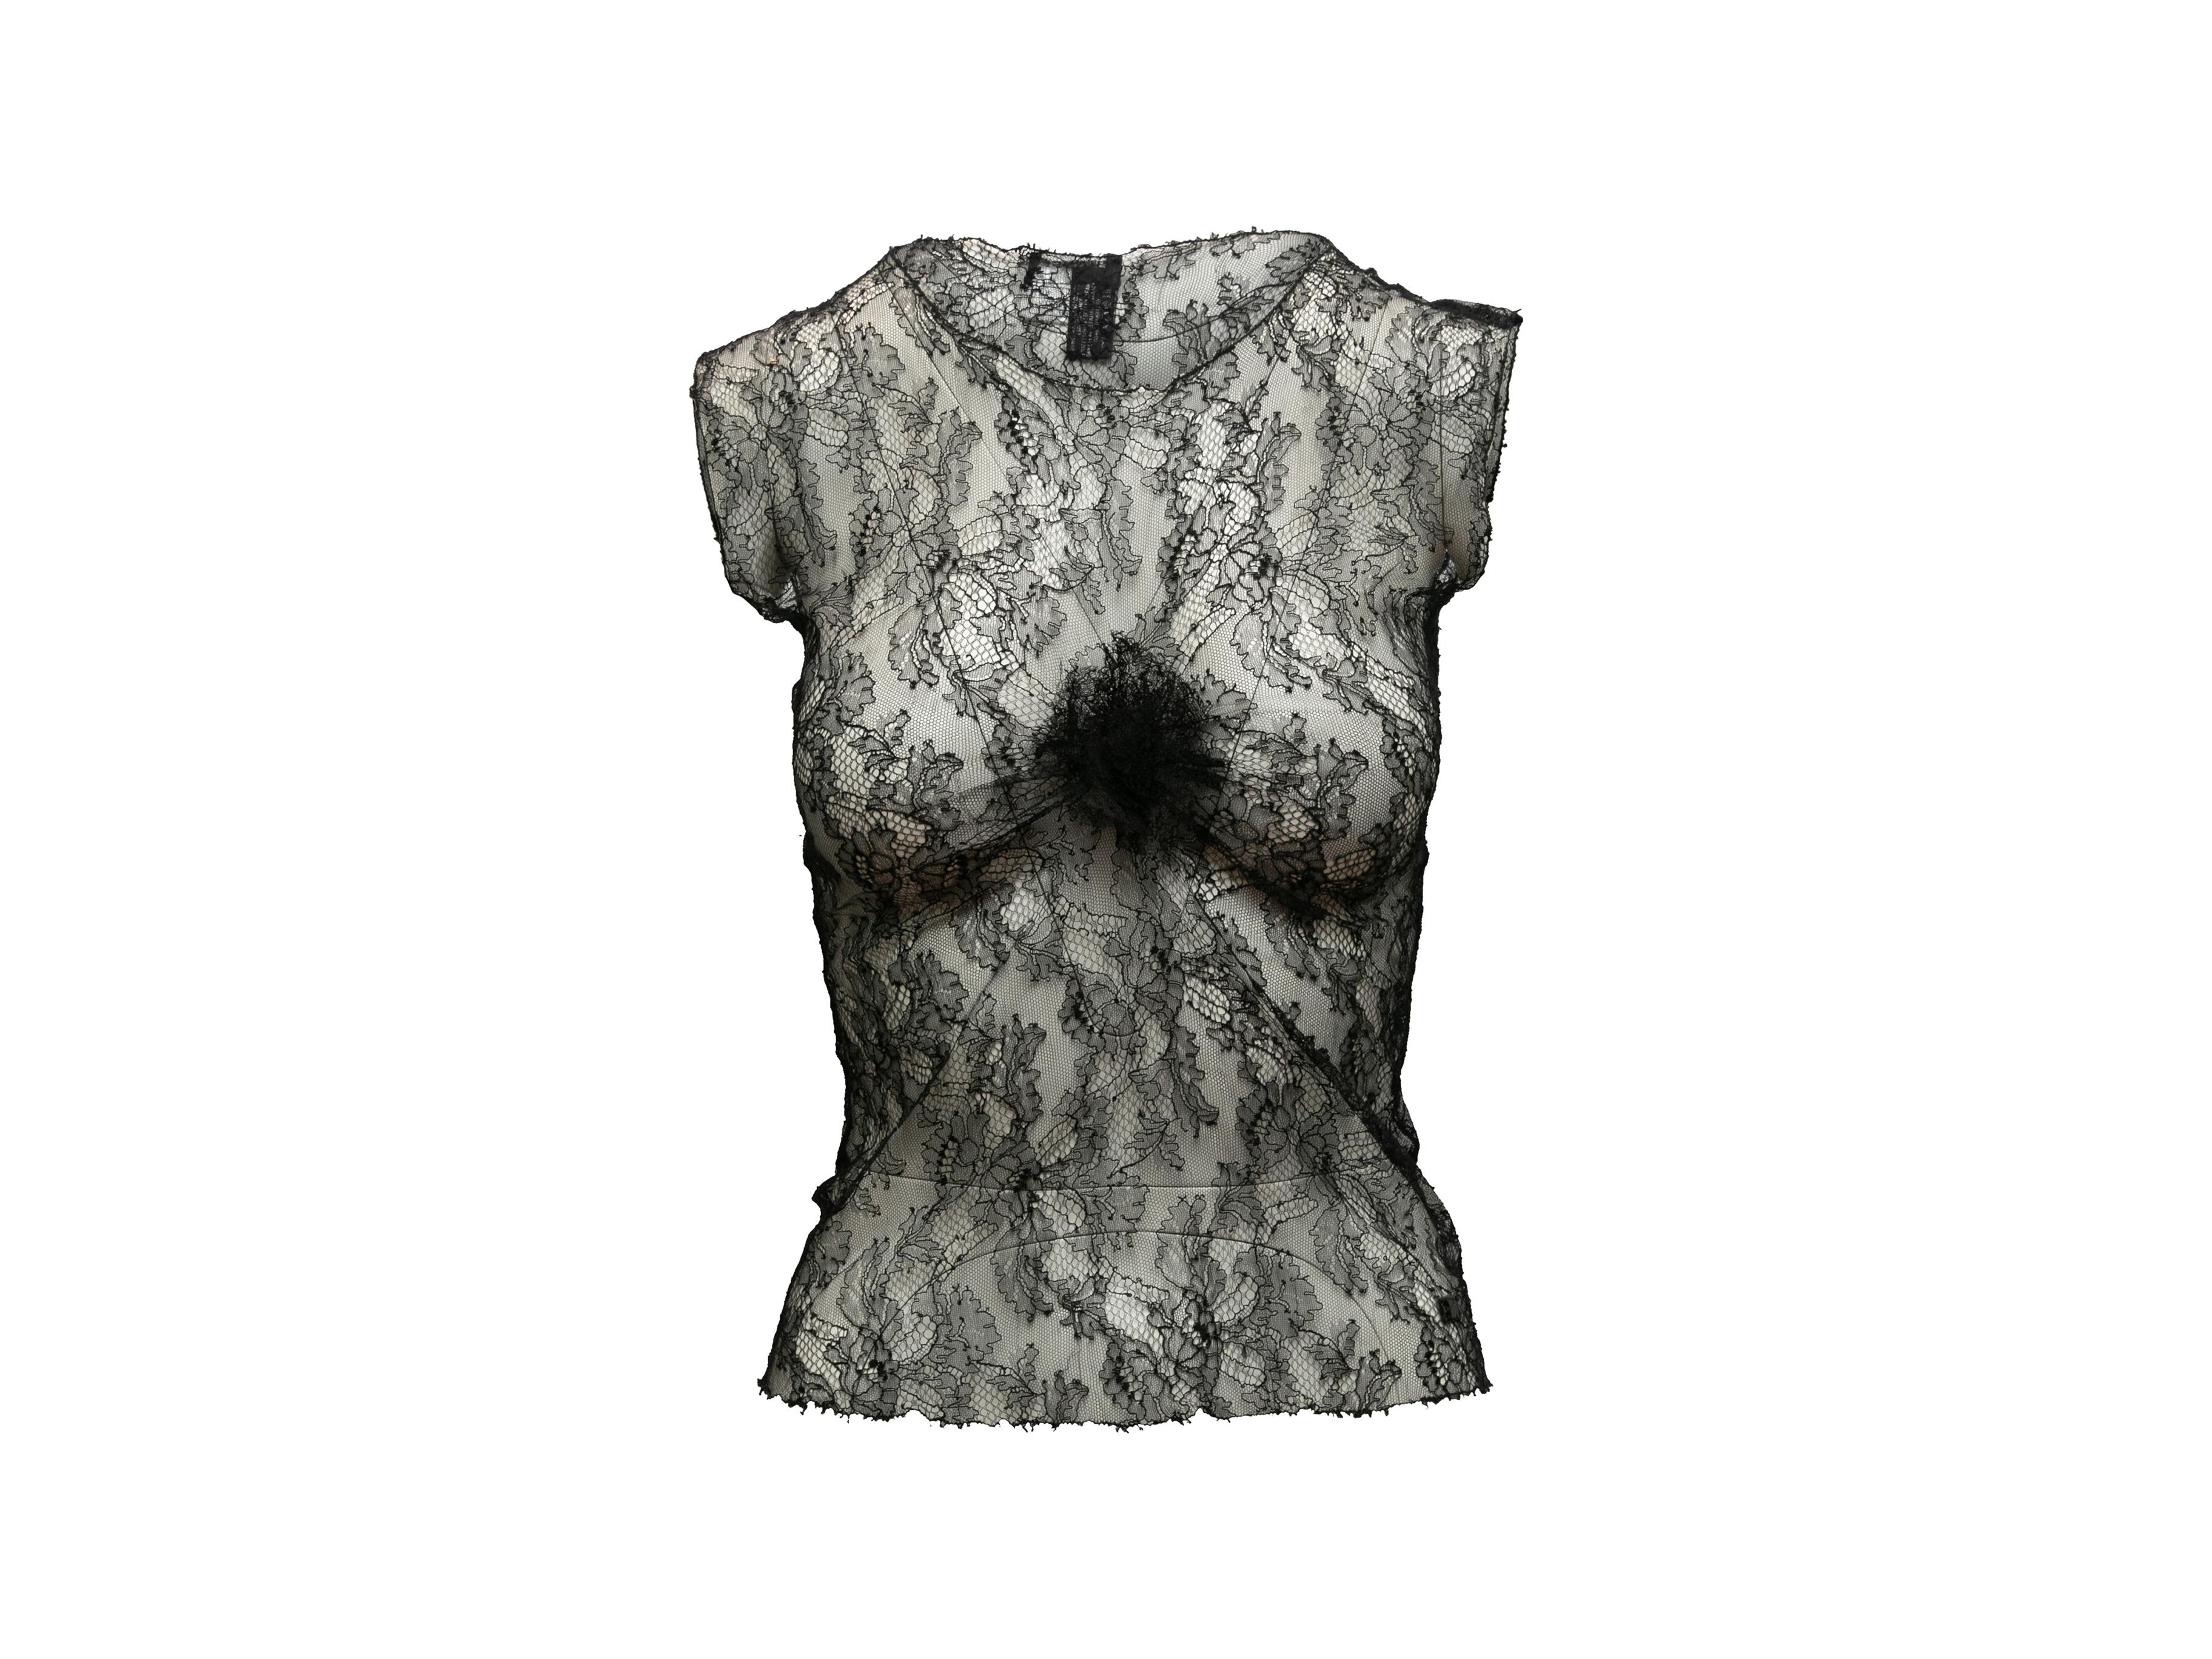 Product details: Black sheer sleeveless lace top by Chanel. Circa 2004. Crew neck. 30